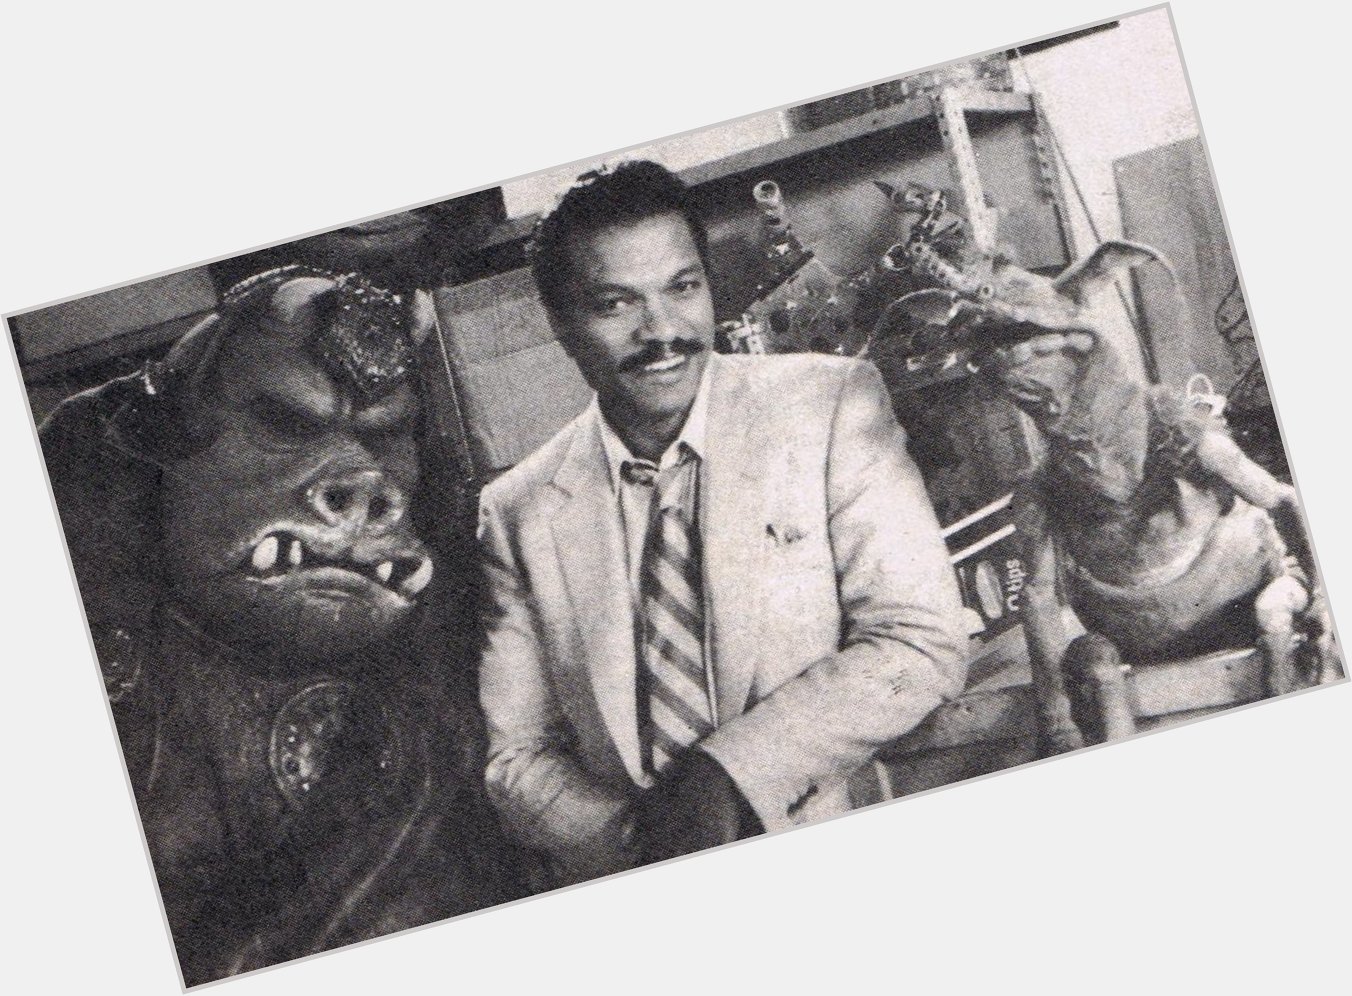 Happy birthday to Billy Dee Williams, born in New York on this day in 1937. 